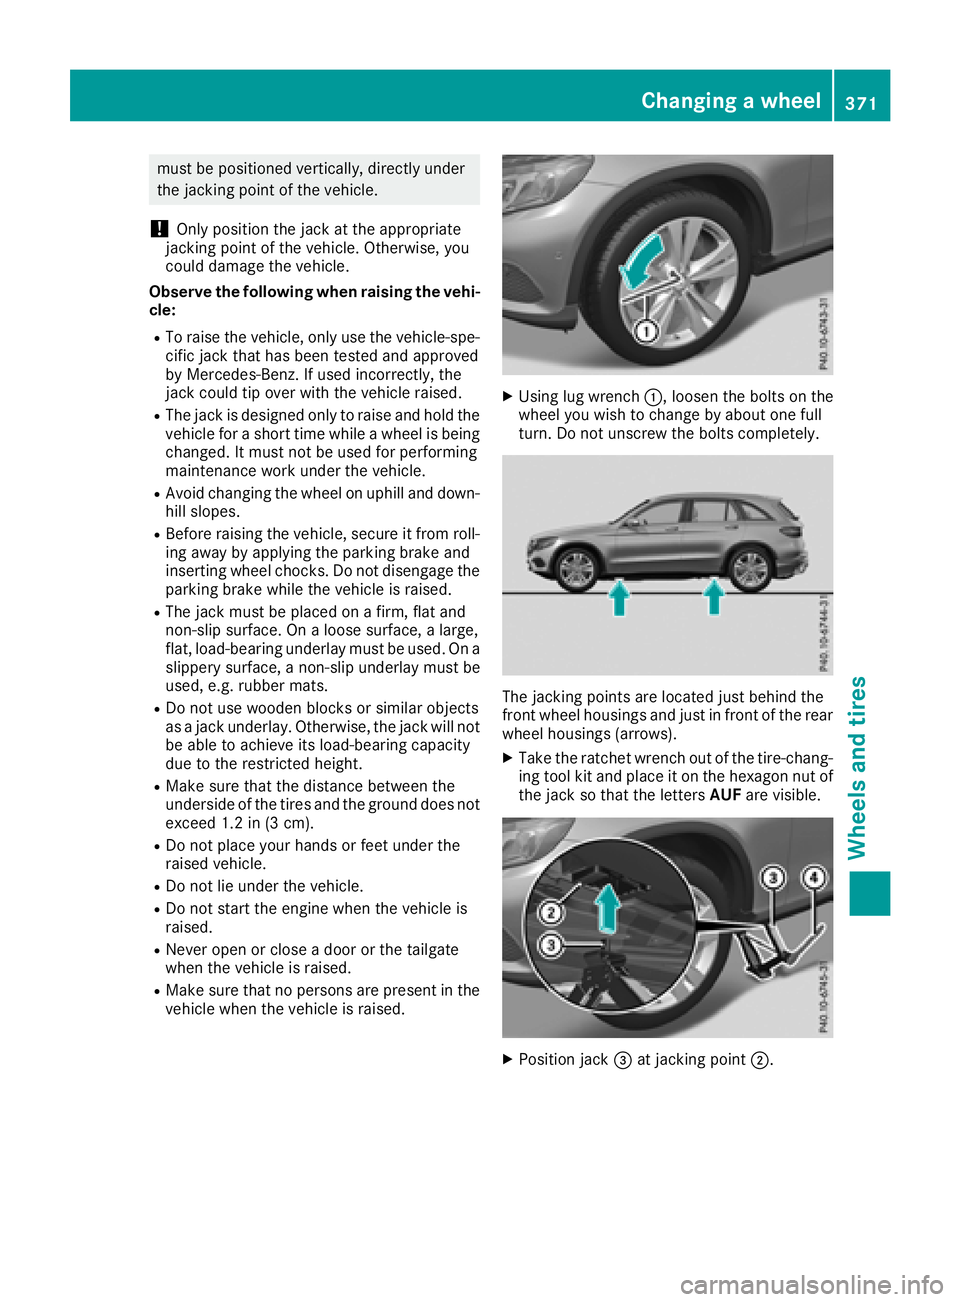 MERCEDES-BENZ GLC SUV 2018  Owners Manual must be positioned vertically, directly under
the jacking point of the vehicle.
!Only position the jack at the appropriate
jacking point of the vehicle. Otherwise, you
could damage the vehicle.
Observ